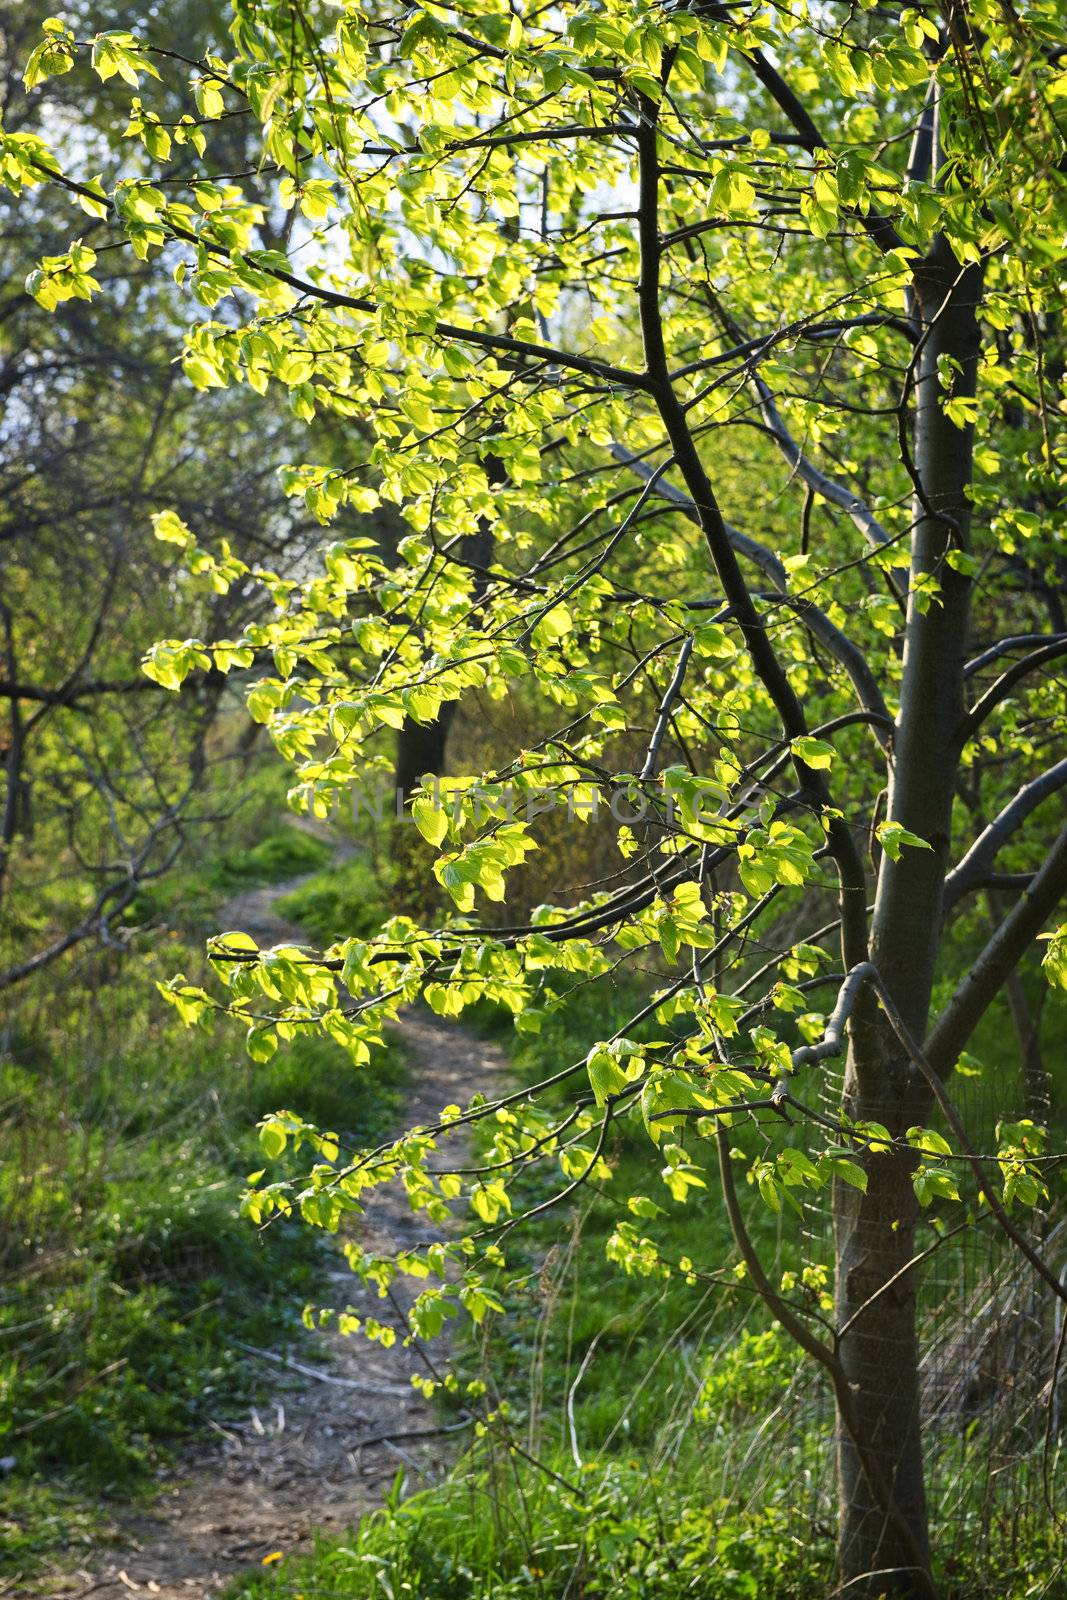 Hiking trail on a sunlit forest path in spring with young linden tree